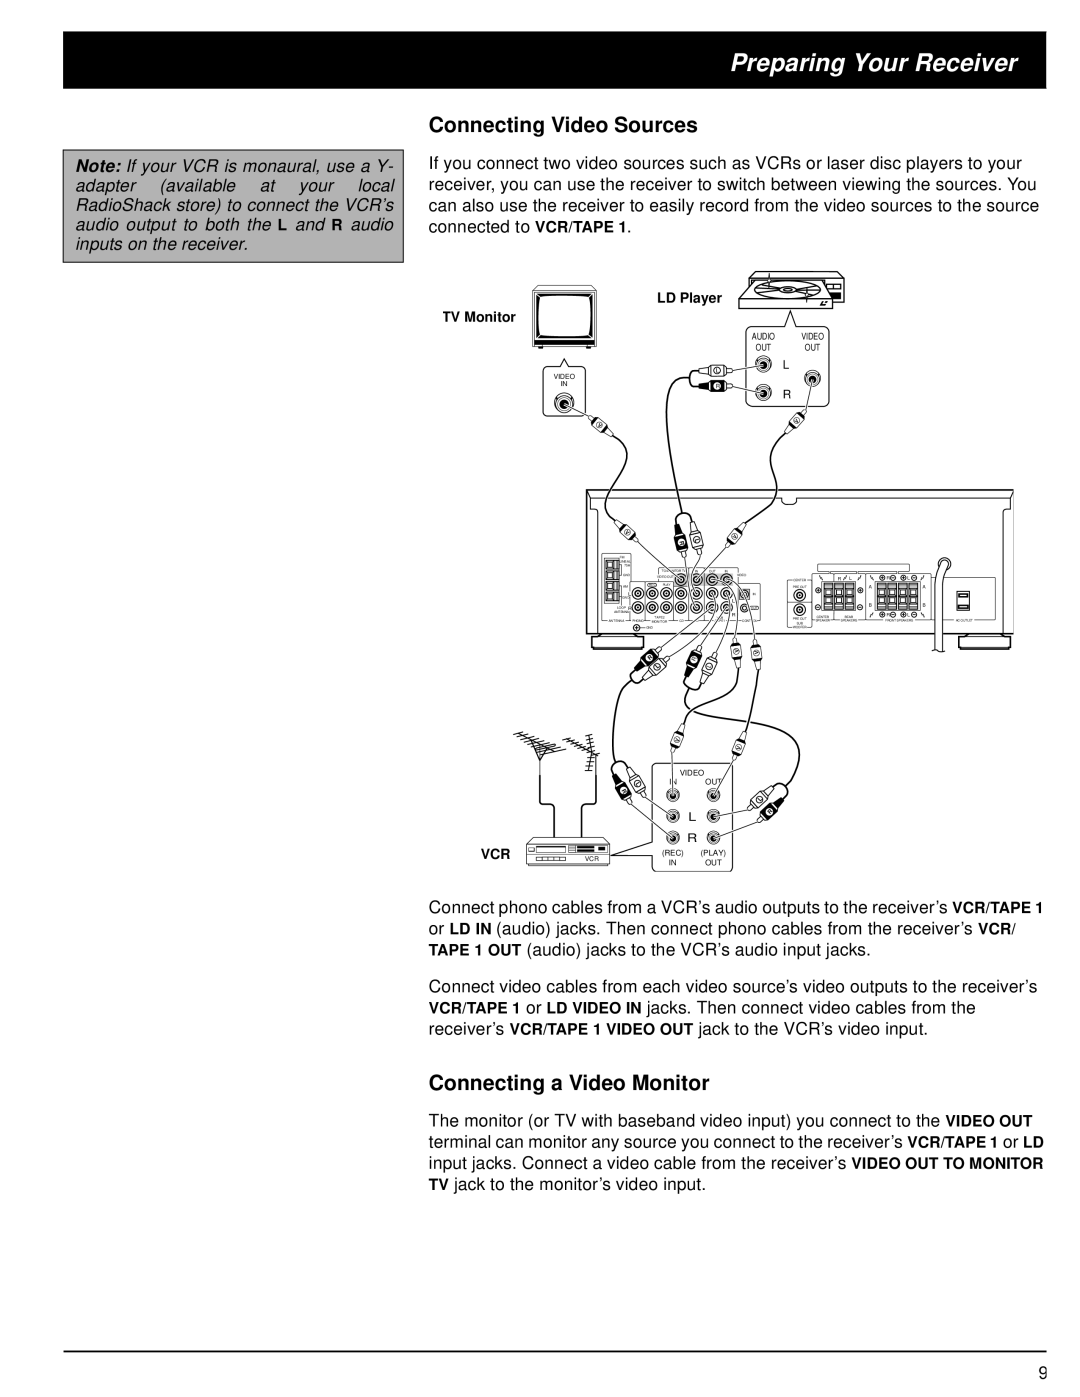 Optimus STAV-3580 owner manual Preparing Your Receiver, Connecting Video Sources, Connecting a Video Monitor 